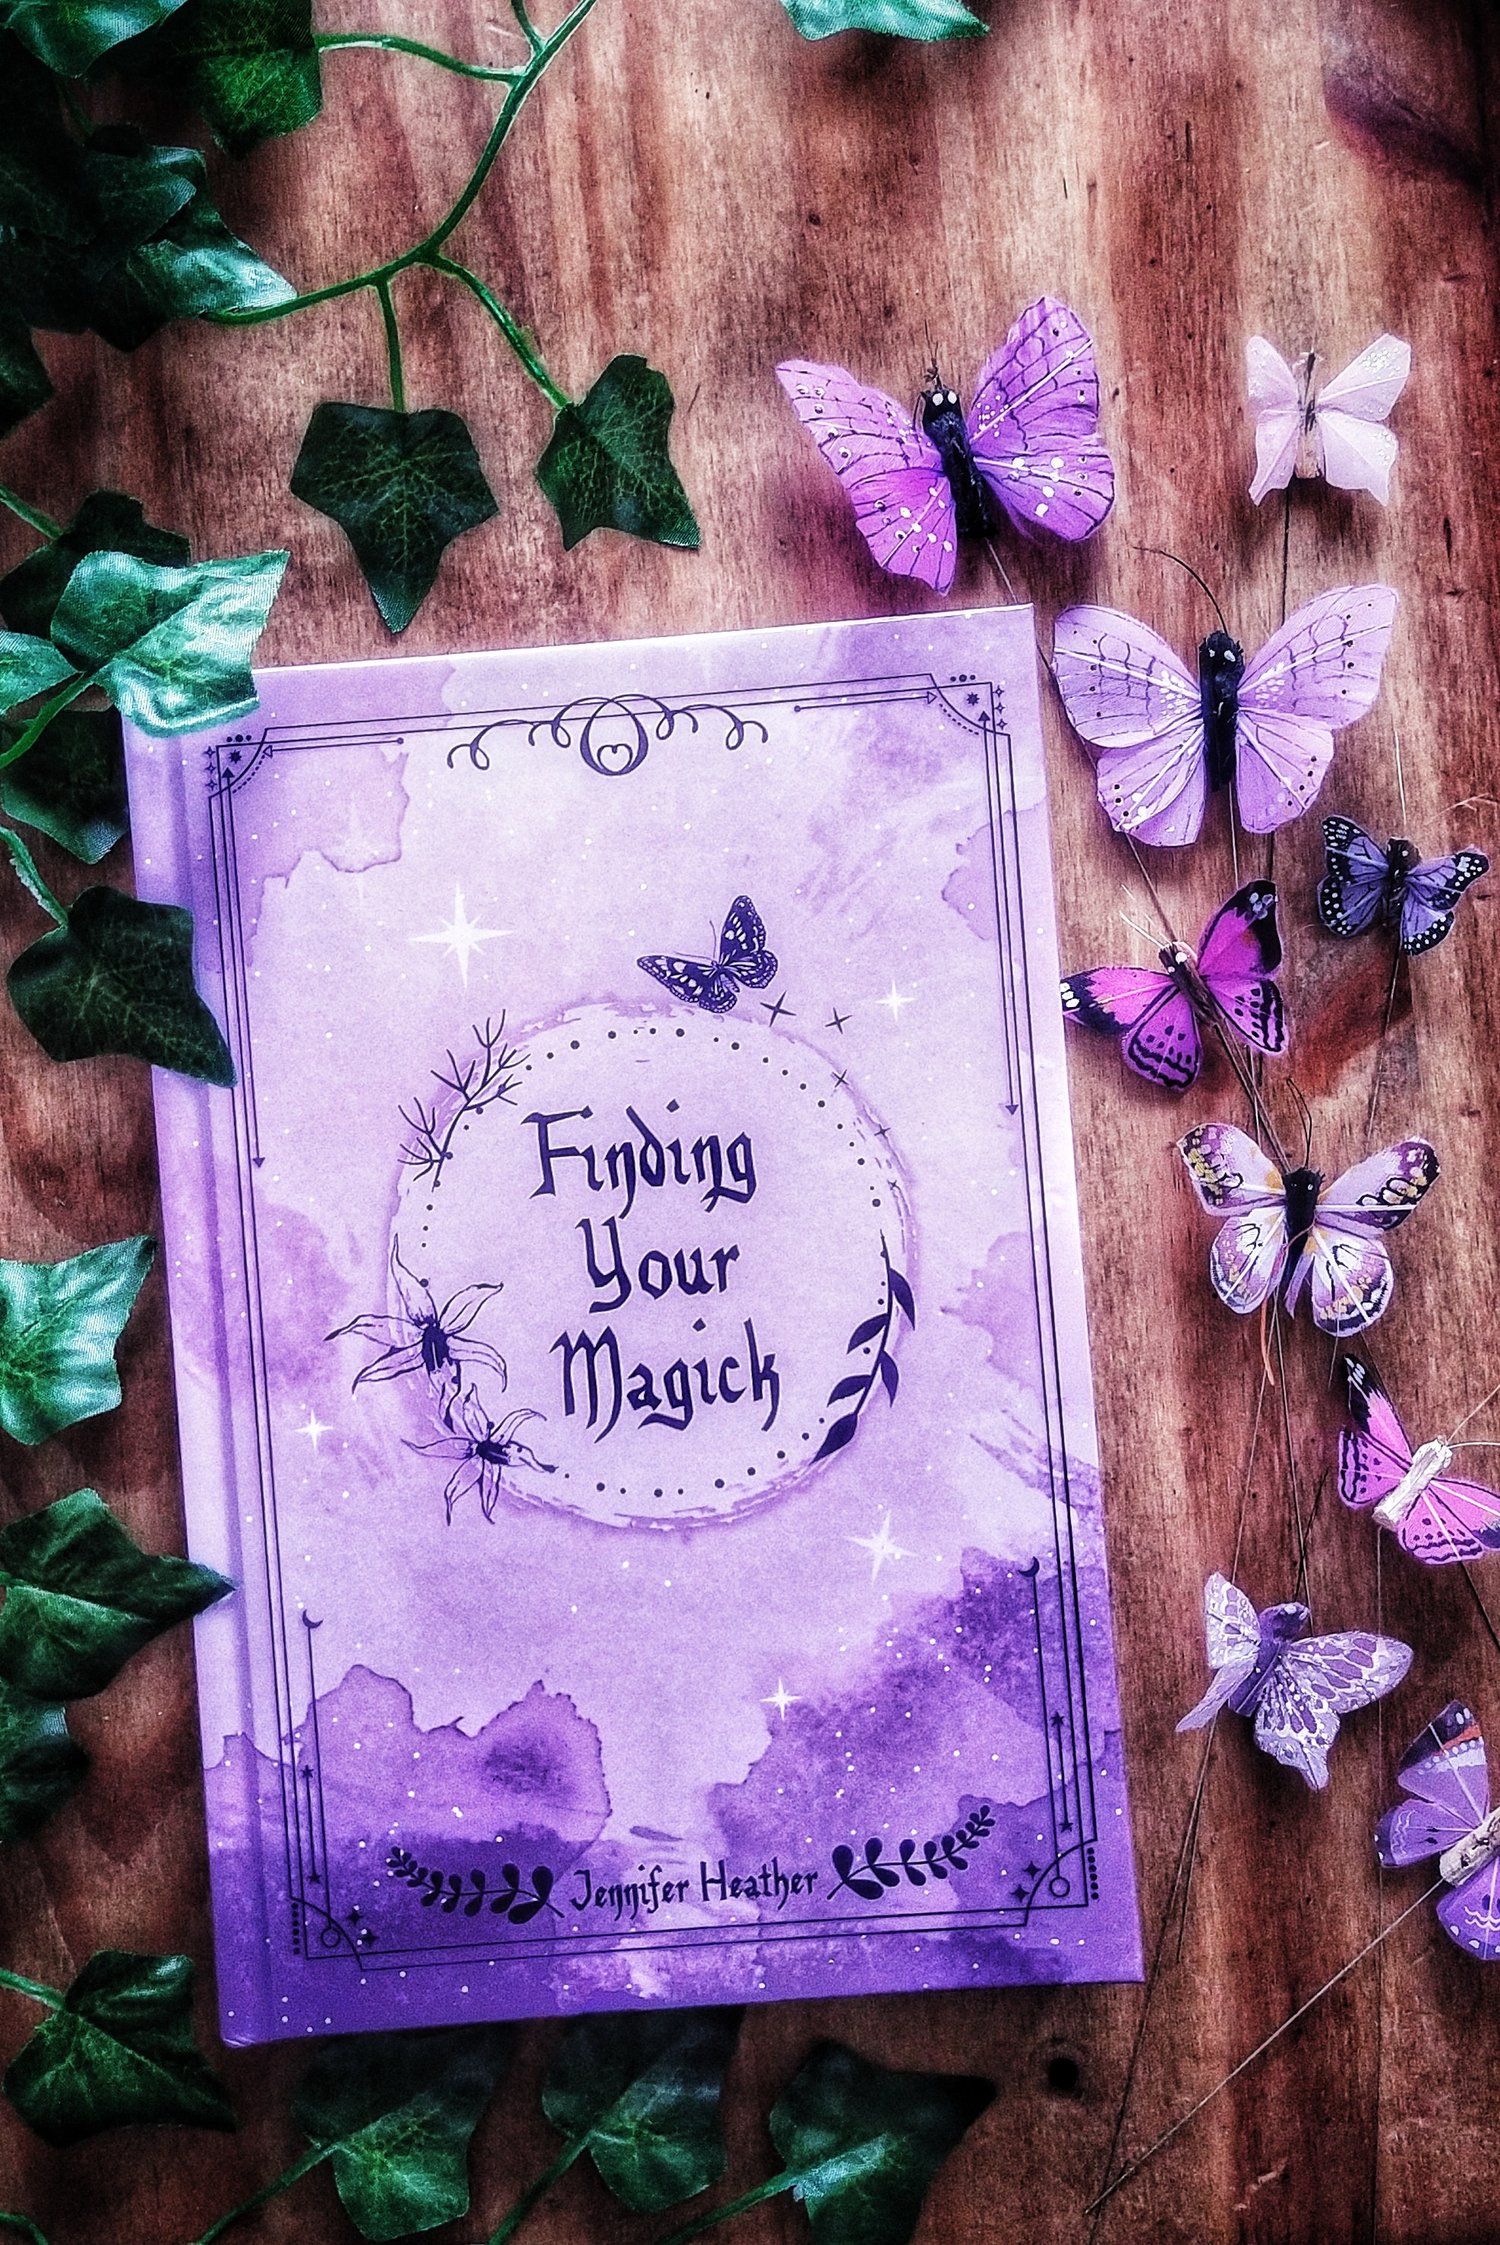 Finding Your Magick Witchcraft Book